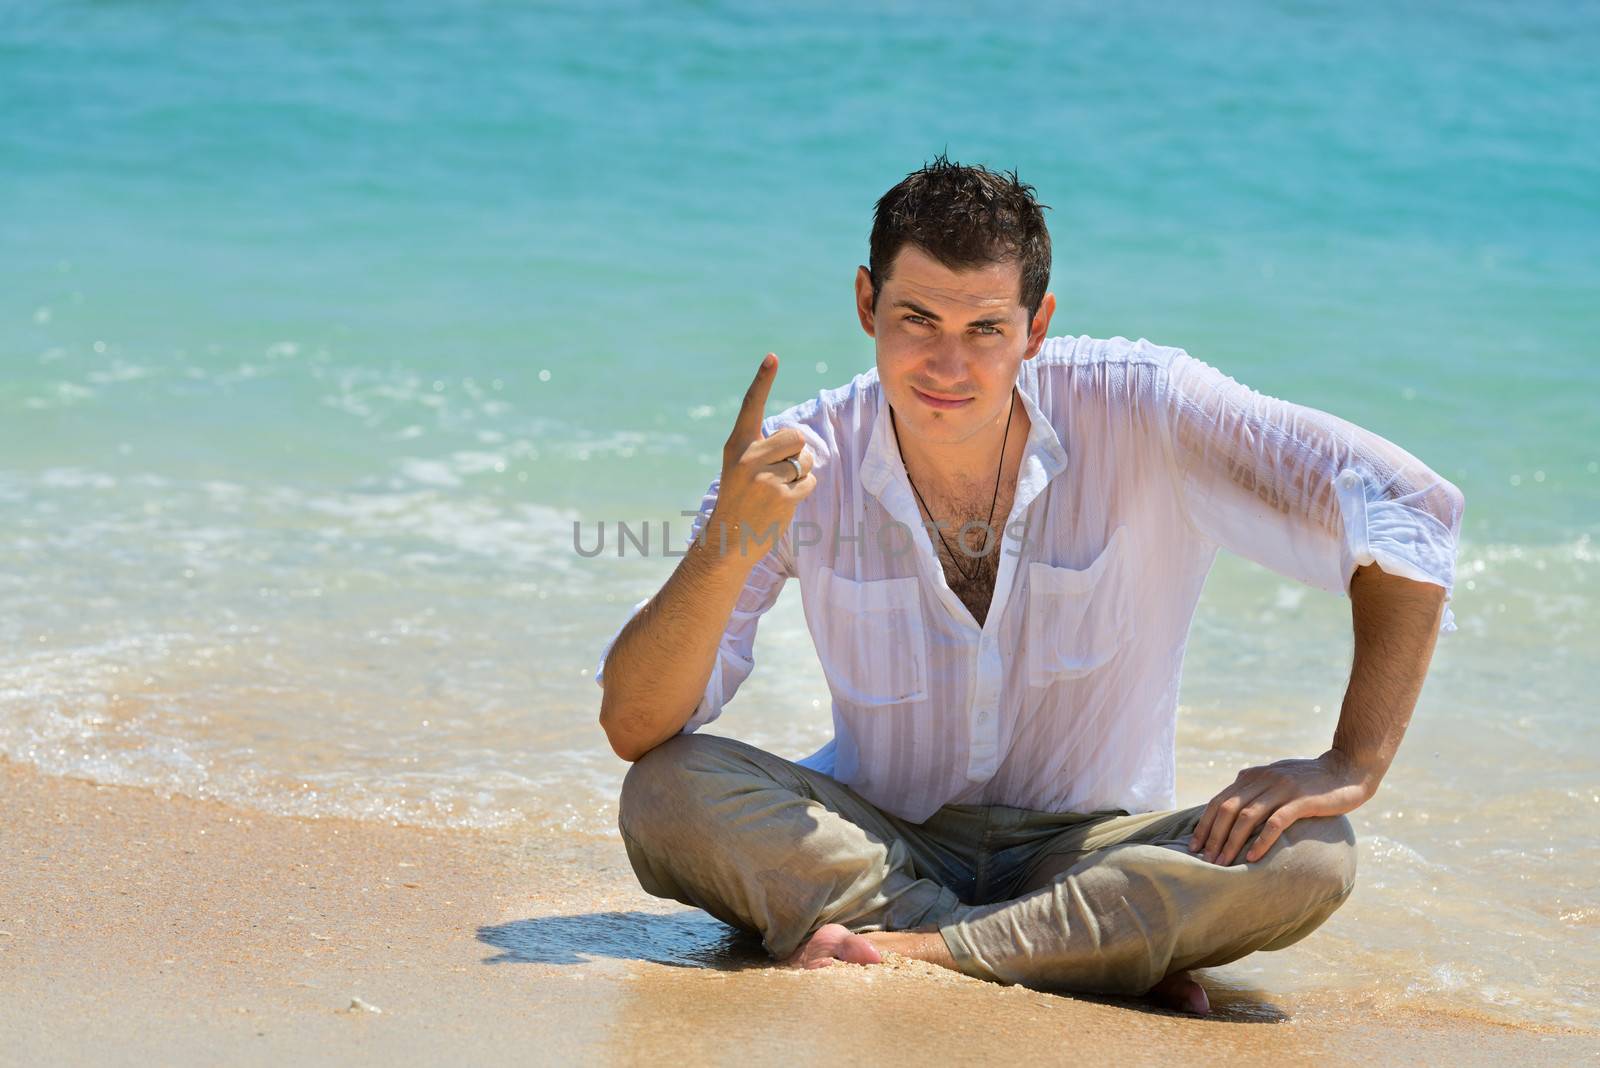 Serious young man sit on a beach near blue water with teaching and instructing gesture